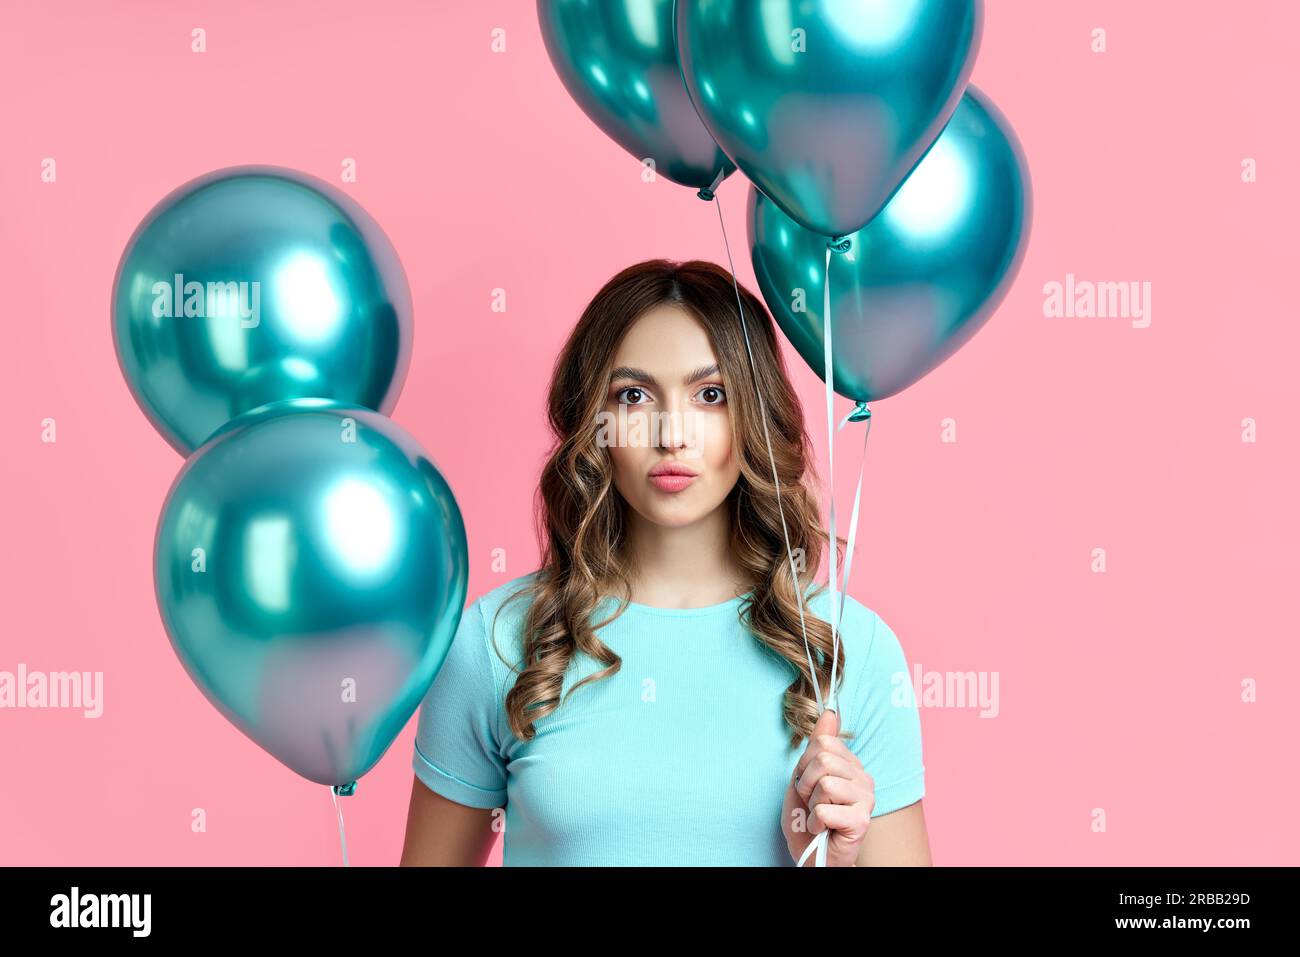 Close up portrait of happy pretty woman with blue balloons in hands on pink background. Party concept Stock Photo